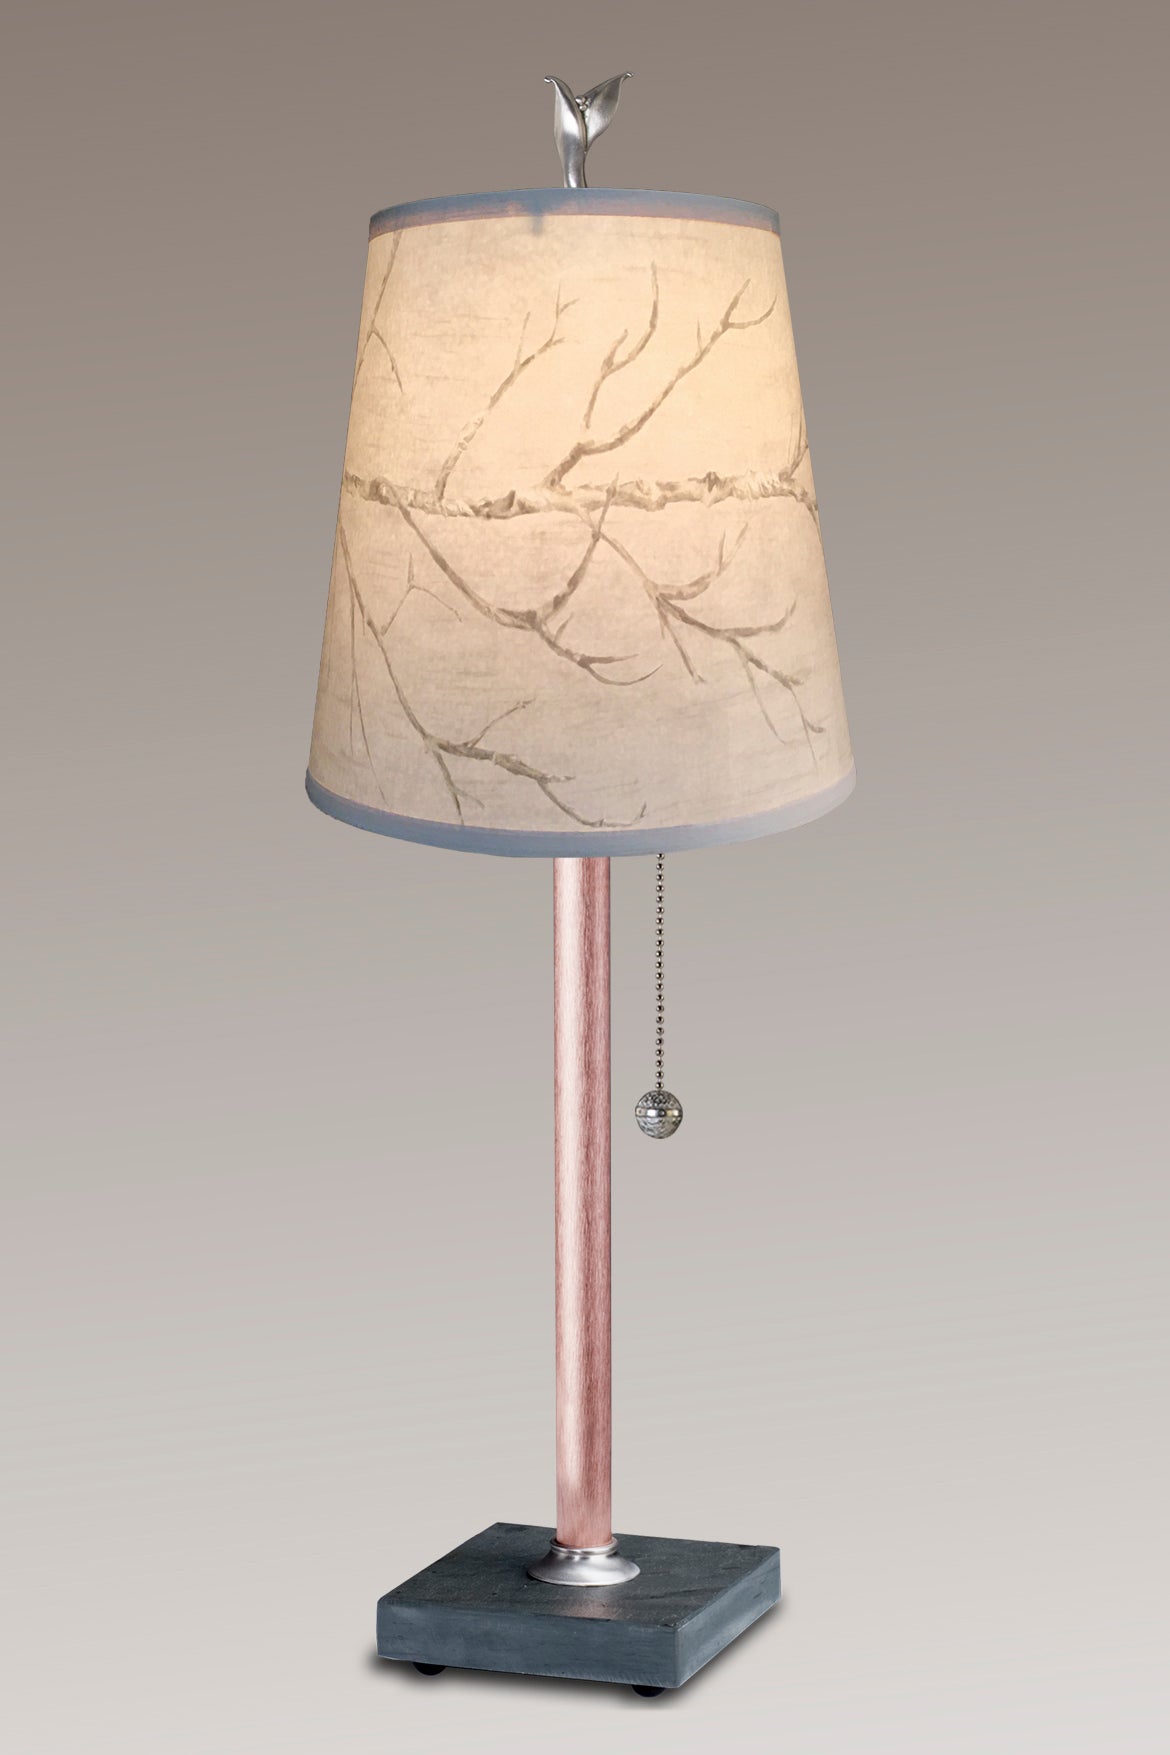 Janna Ugone &amp; Co Table Lamps Copper Table Lamp with Small Drum Shade in Sweeping Branch